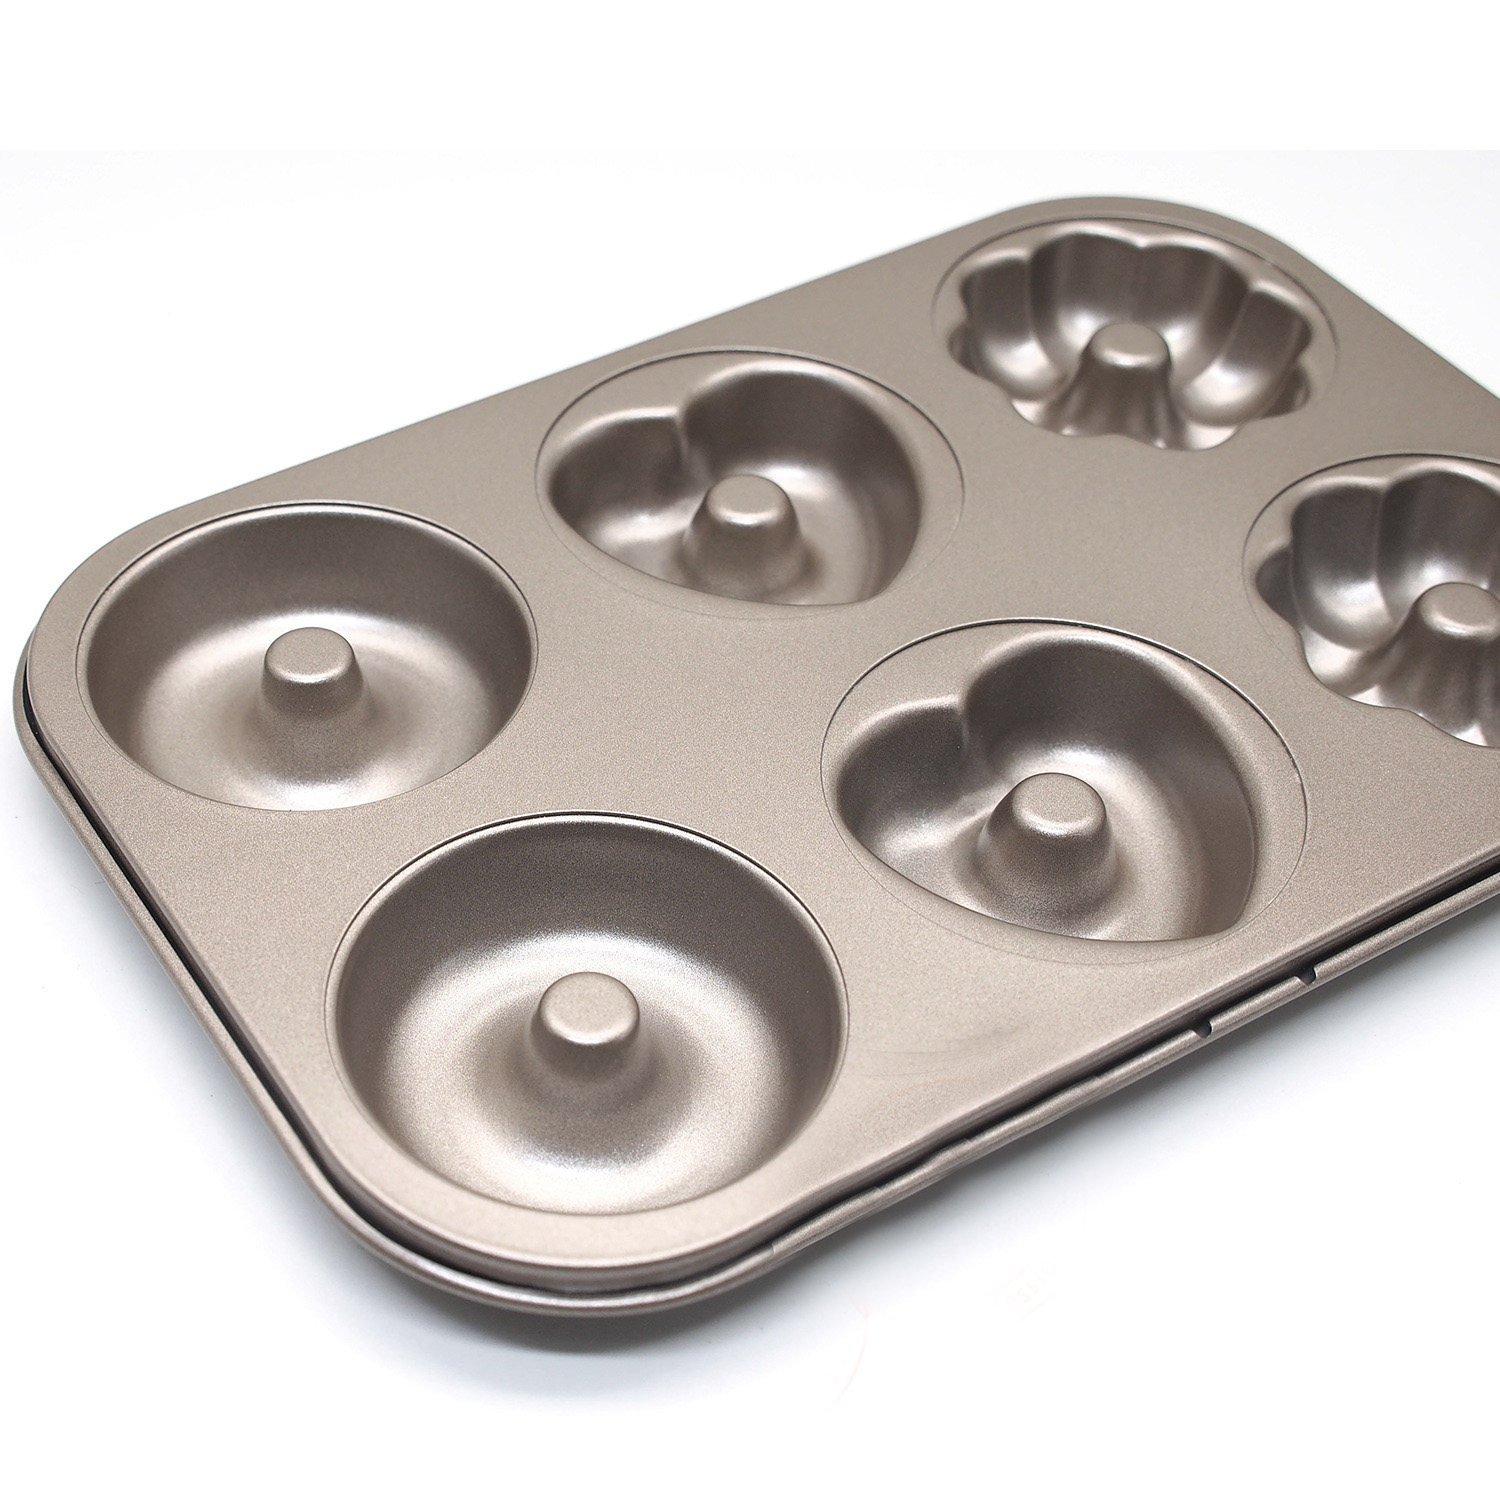 High quality carbon steel 6 cup gold cupcake baking tray non-stick muffin cup baking pan